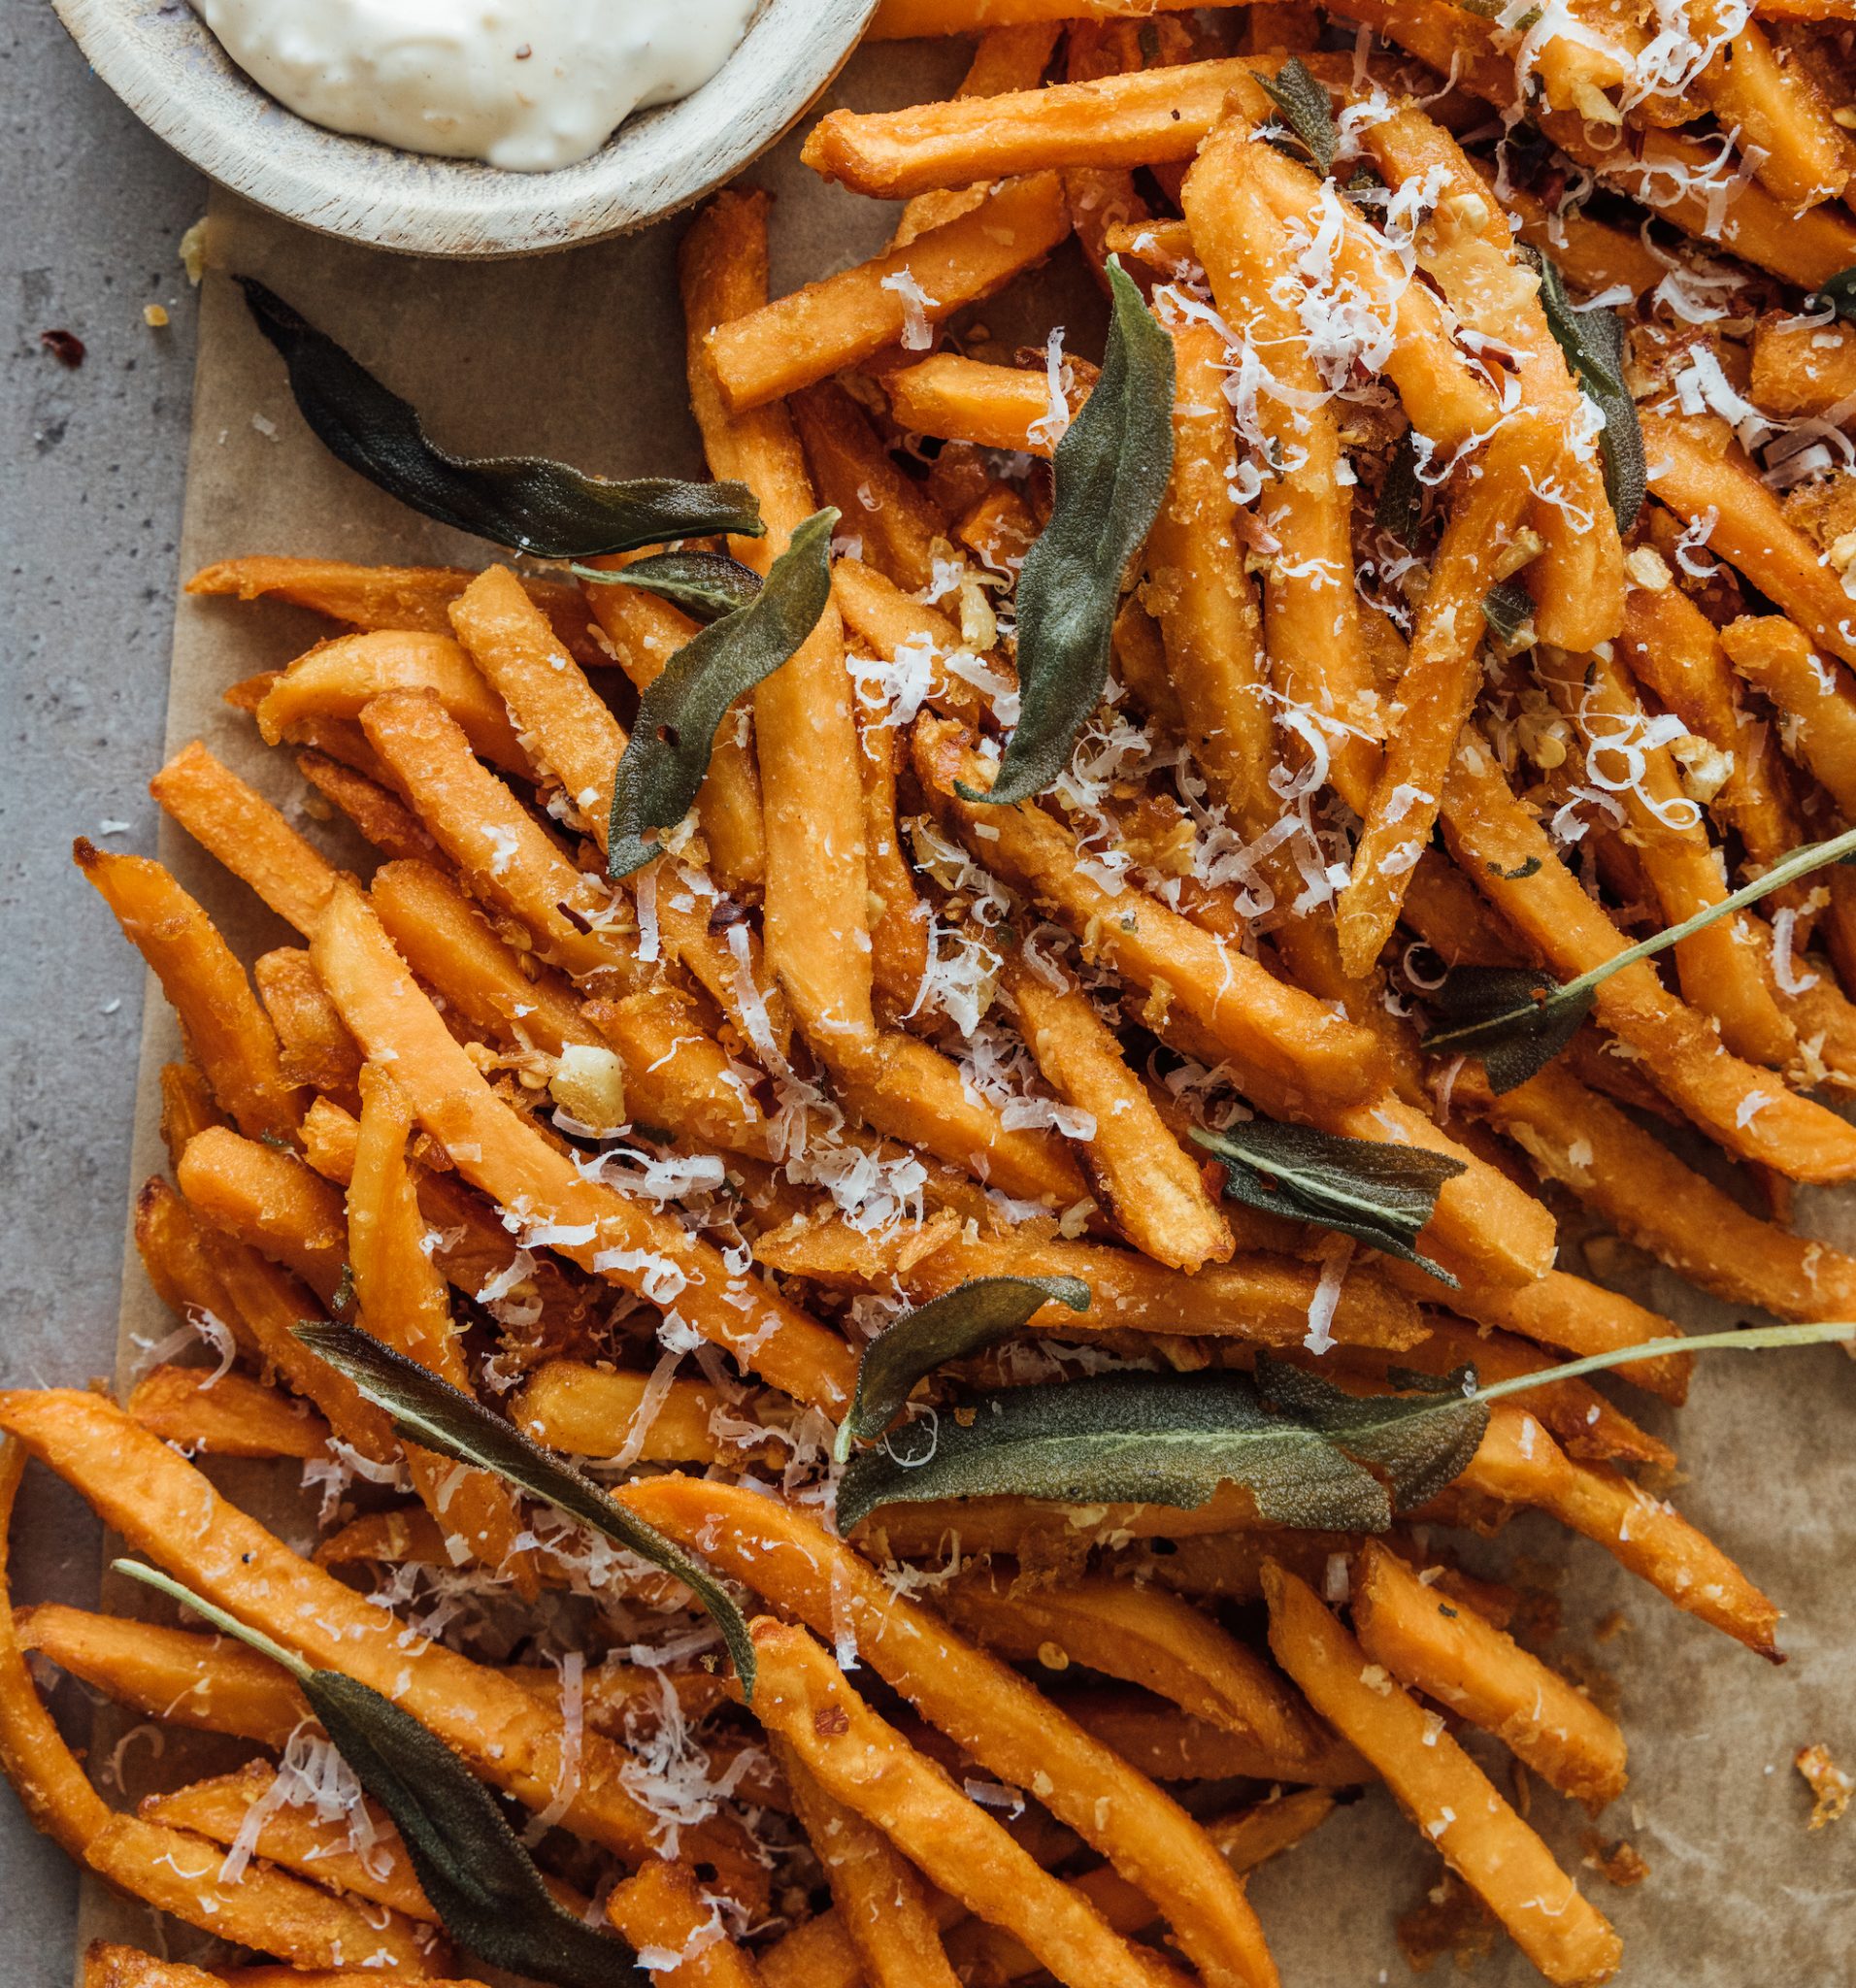 Baked Spiralized Sweet Potato Fries with Garlic and Parsley - Know